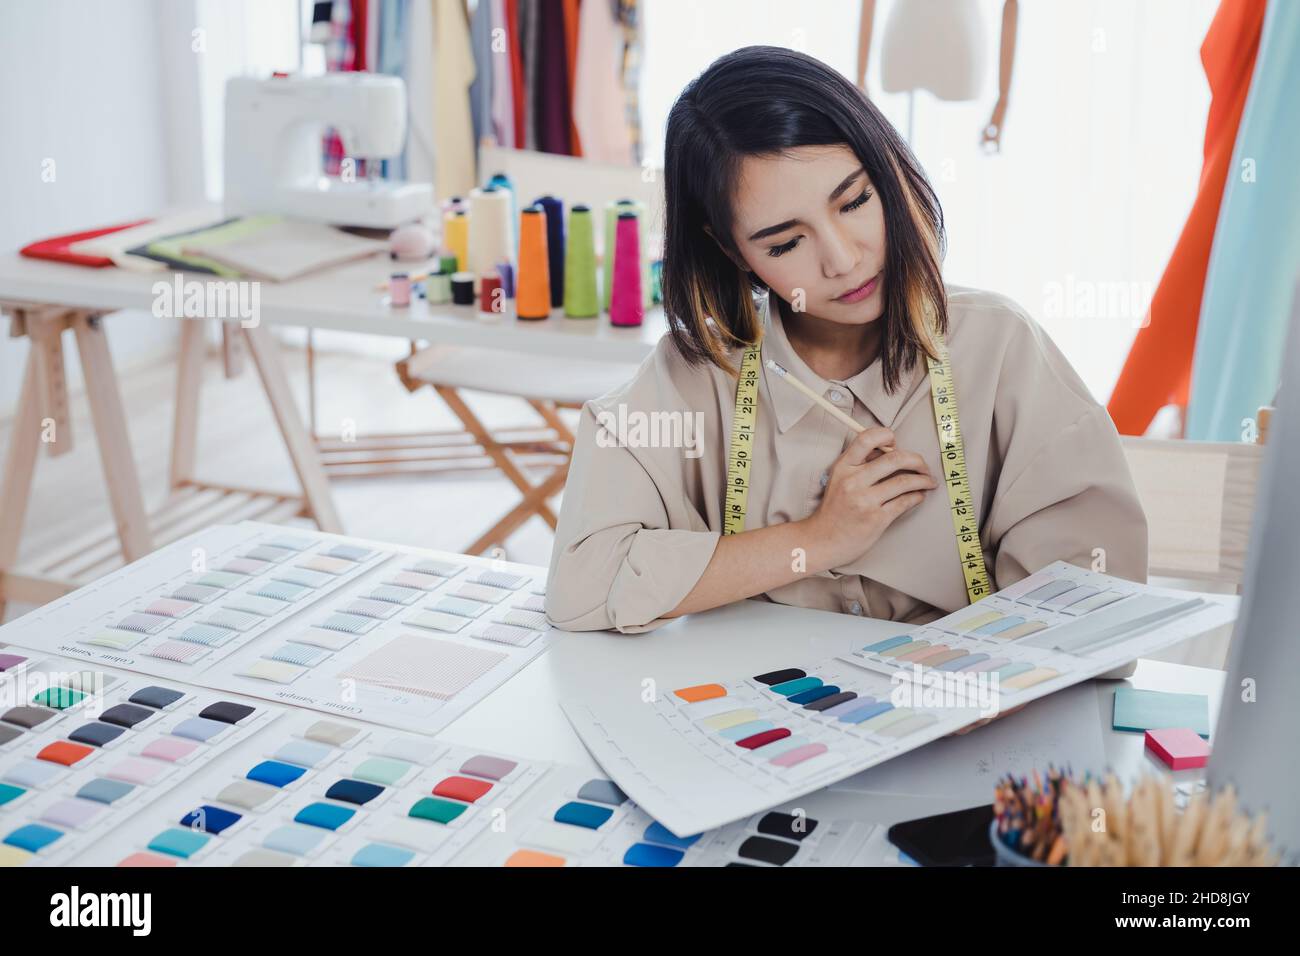 Asian woman designer are thinking and designing clothes for customers order items at the designer desk in the studio. Clothes designers are working in Stock Photo